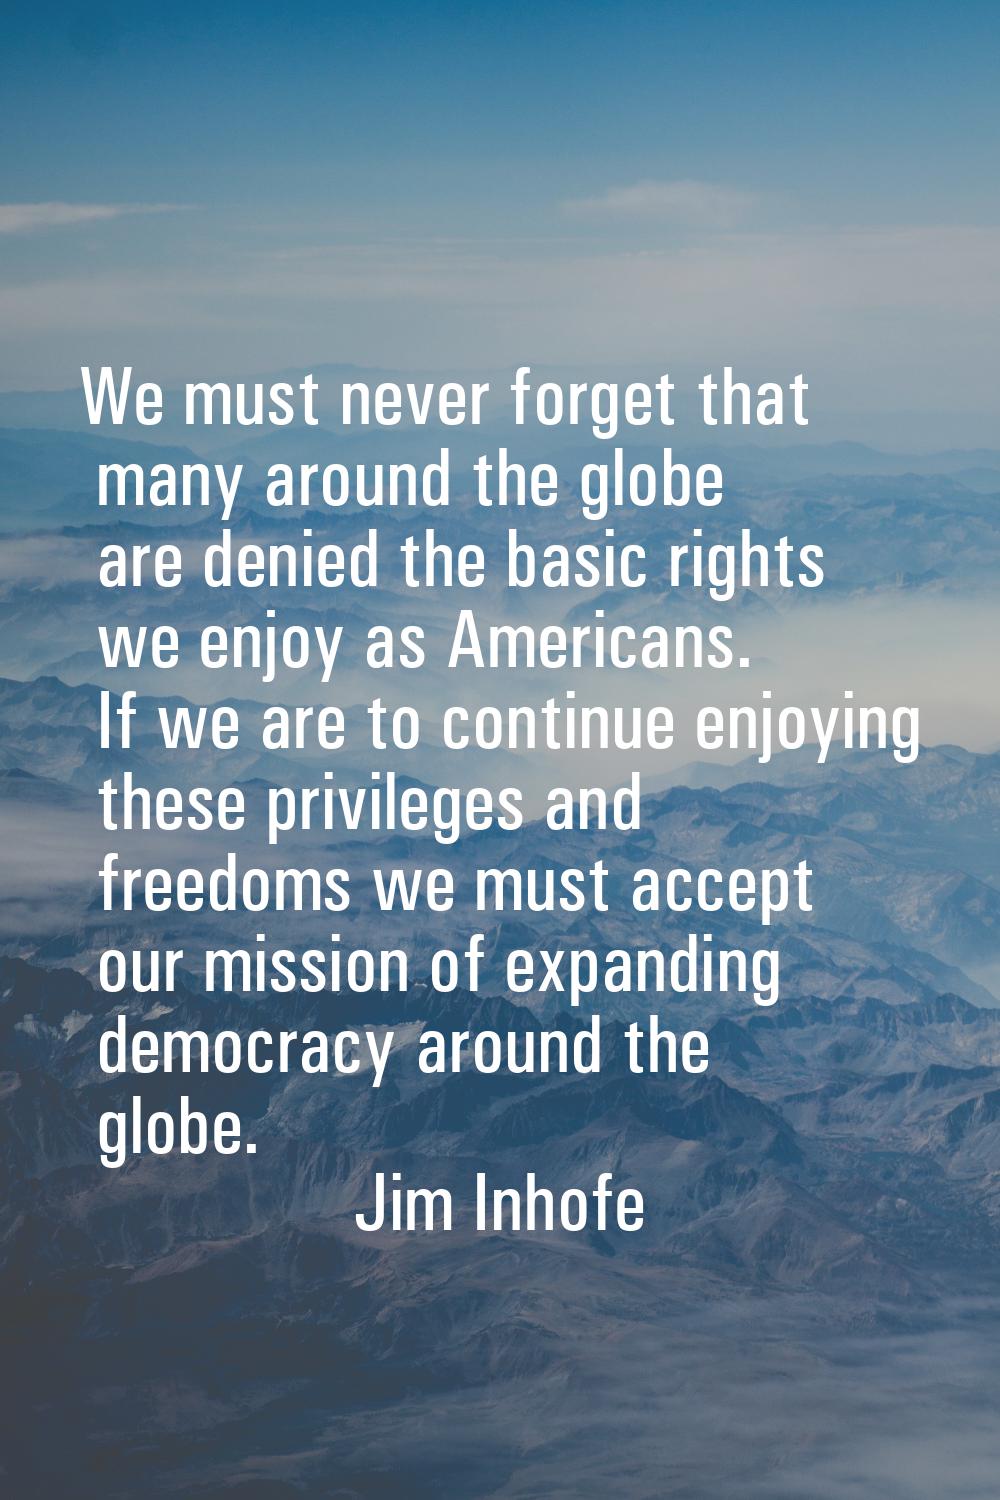 We must never forget that many around the globe are denied the basic rights we enjoy as Americans. 